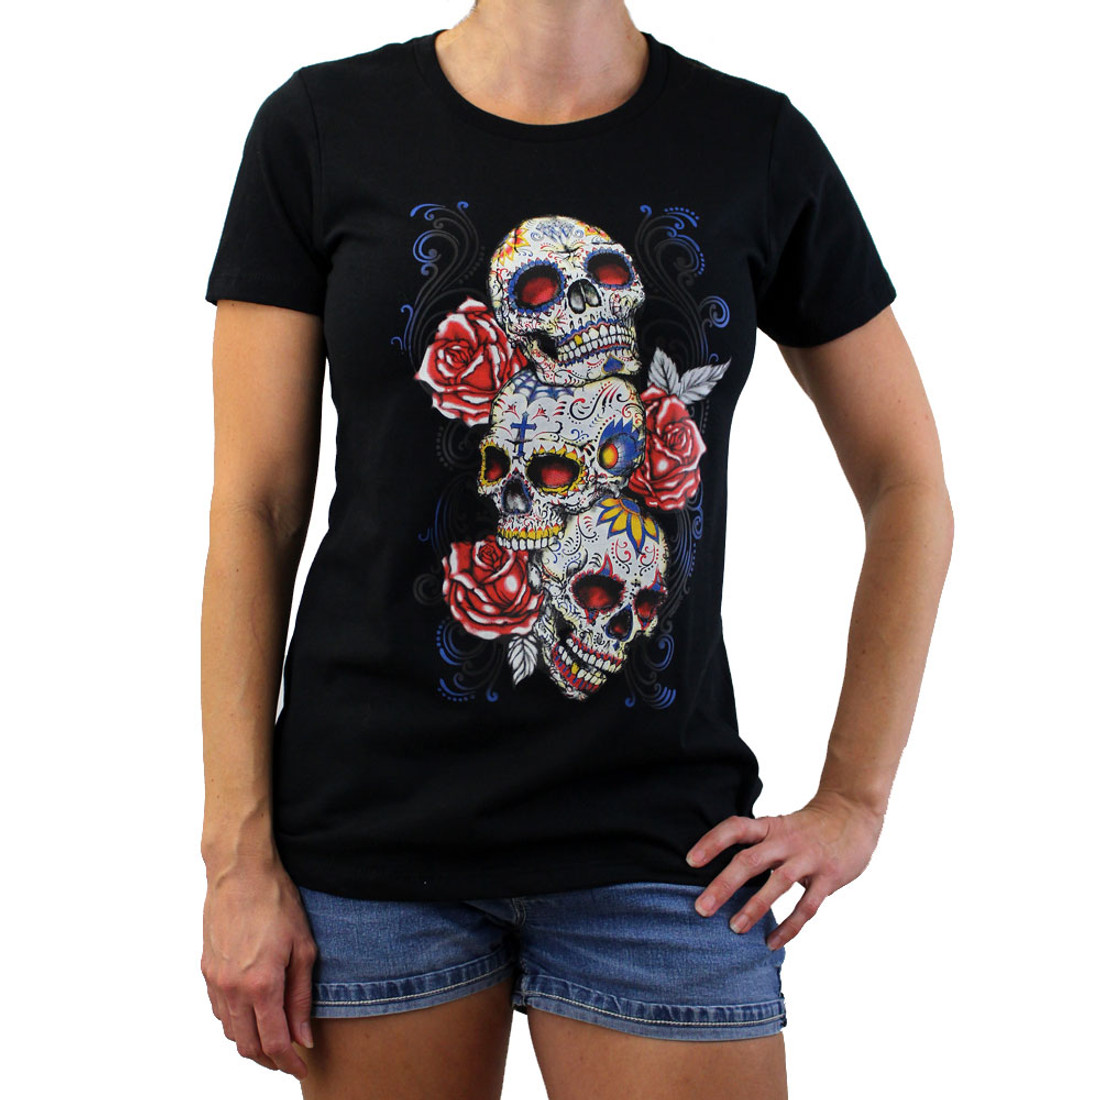 Black tee shirt with 3 Day of the Dead skulls.